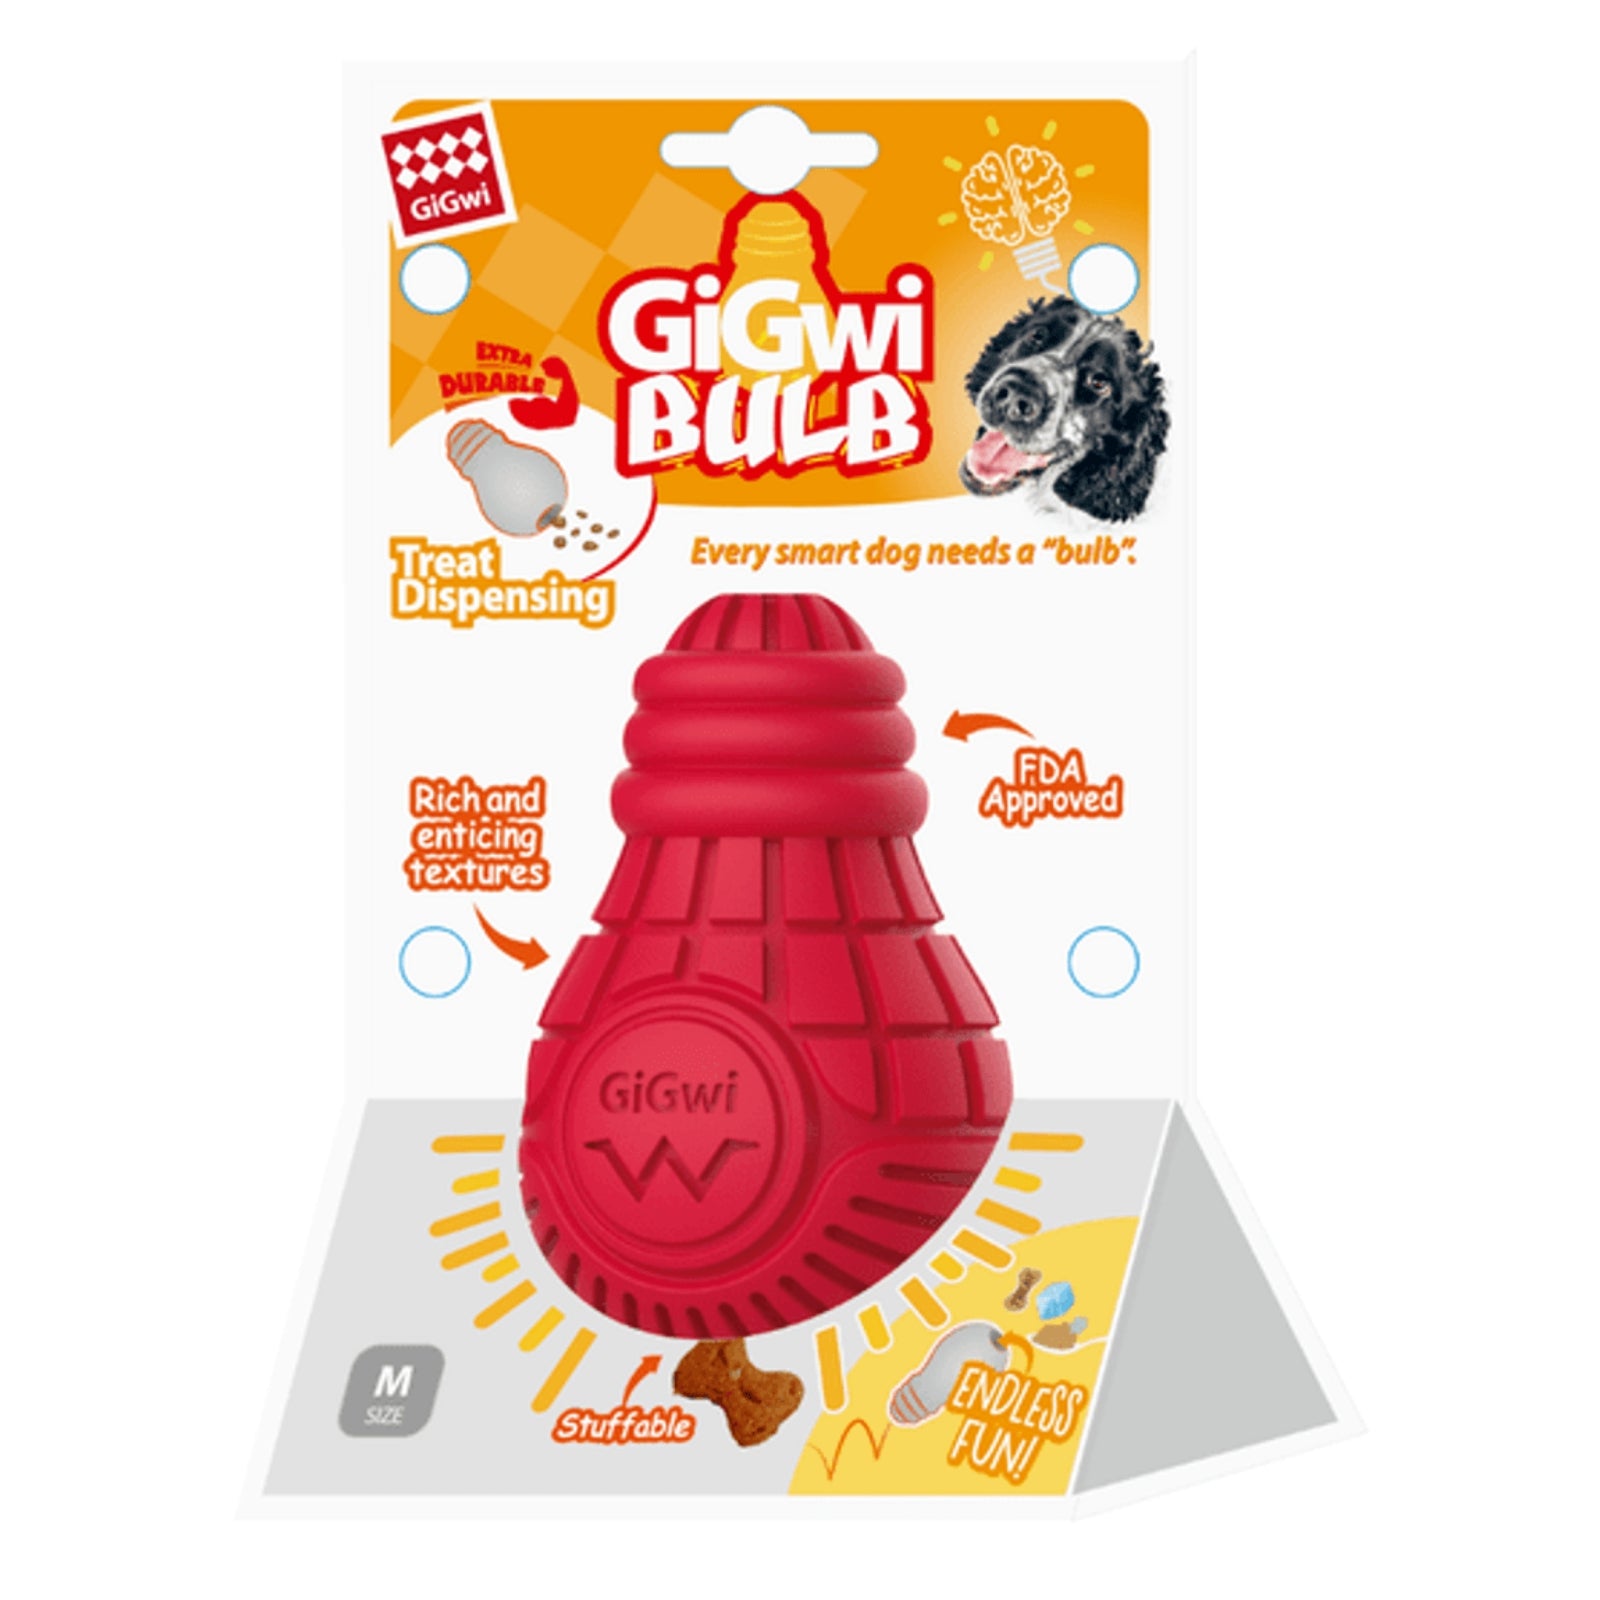 GIGWI Bulb Treat Dispensing Interactive Dog Toy for Medium Sized Dogs